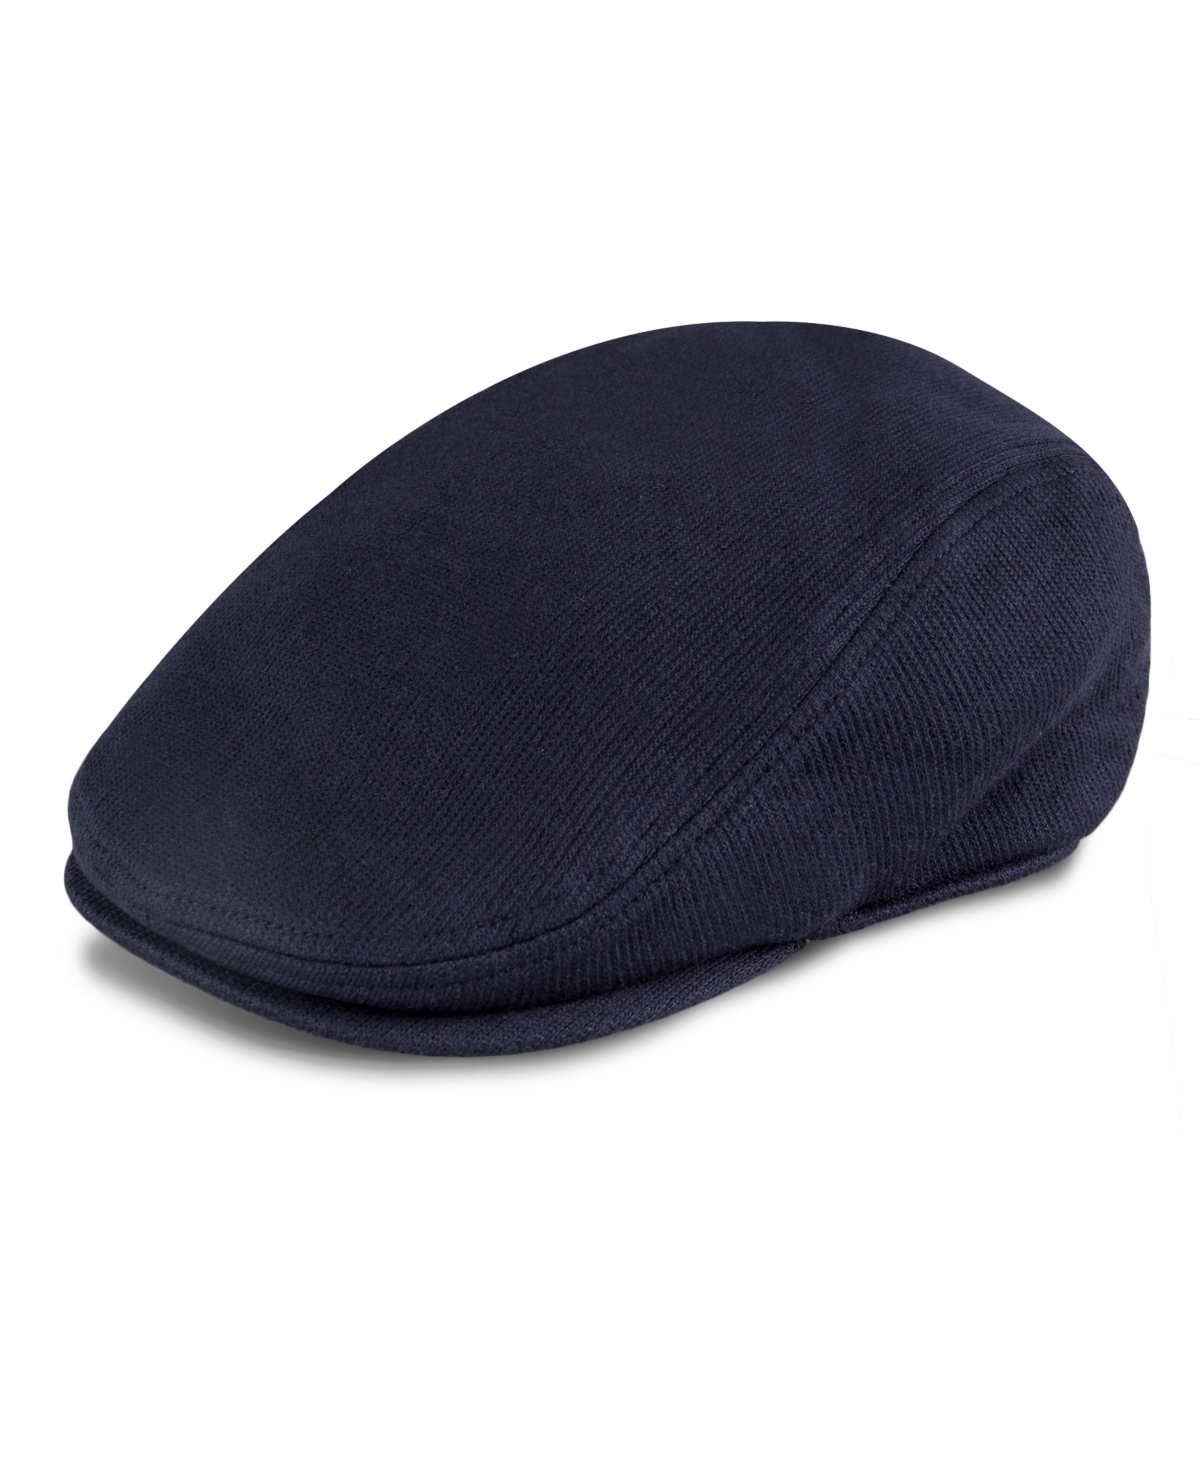 Men's Stretch Knit Flat Top Ivy Cap with Sherpa Fleece Lining - Navy